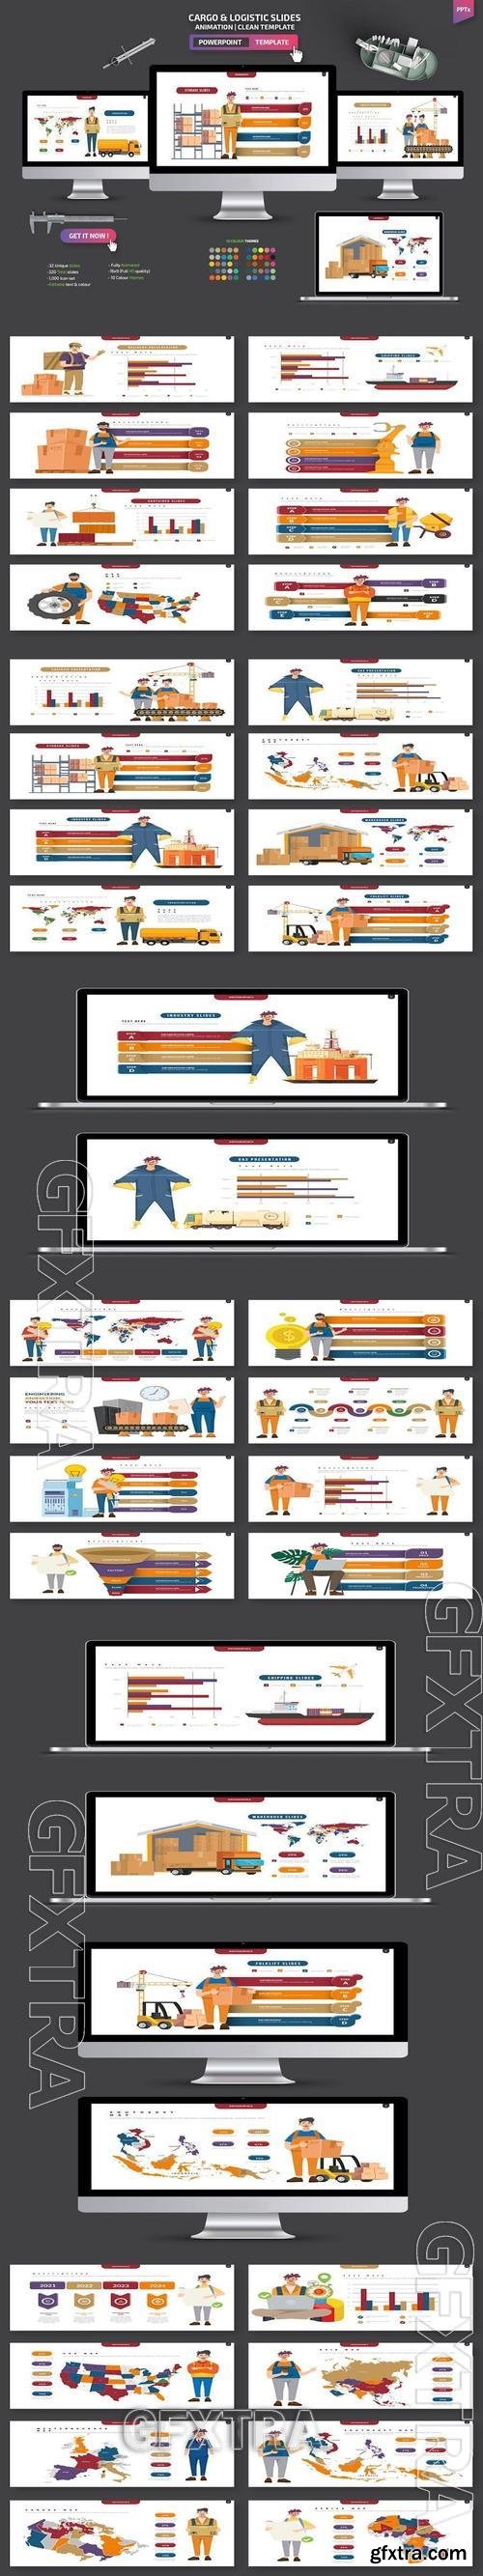 Cargo And Logistic Powerpoint Templates LRTB62W